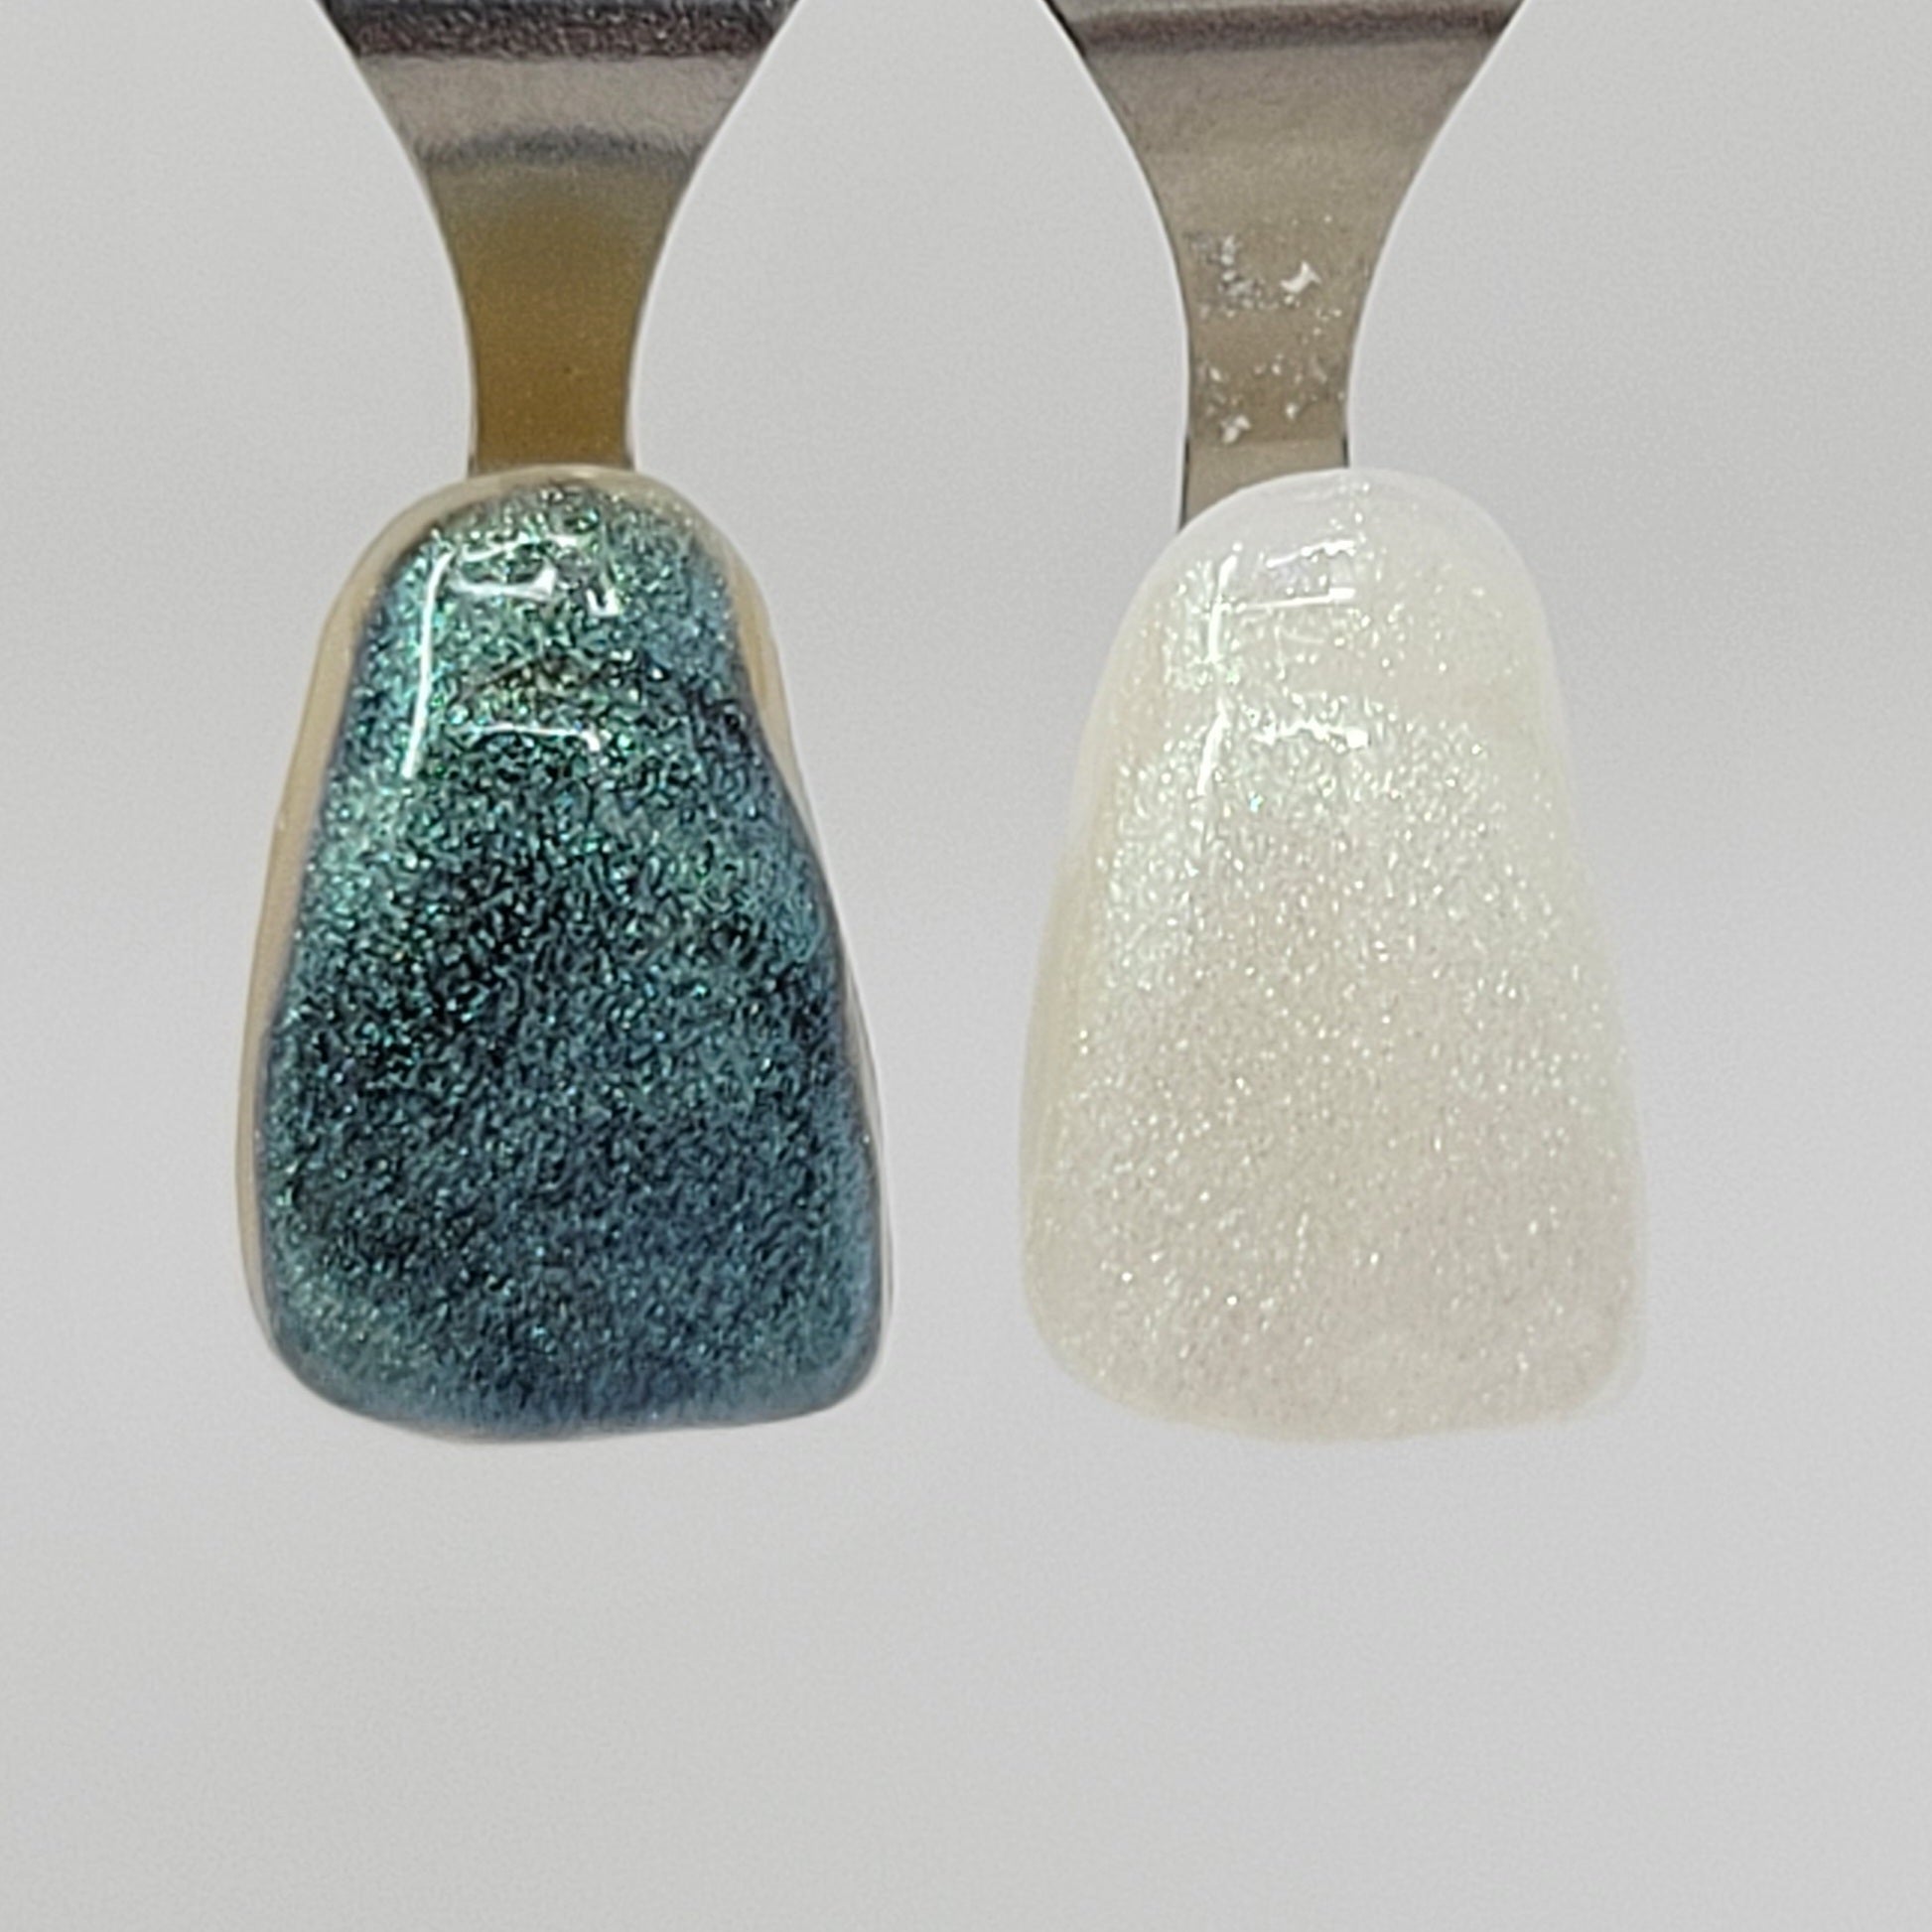 Turquoise Temporary Tattooth Colorant on a demo tooth.  These colorants can be applied to teeth to temporarily alter their color or iridescence.